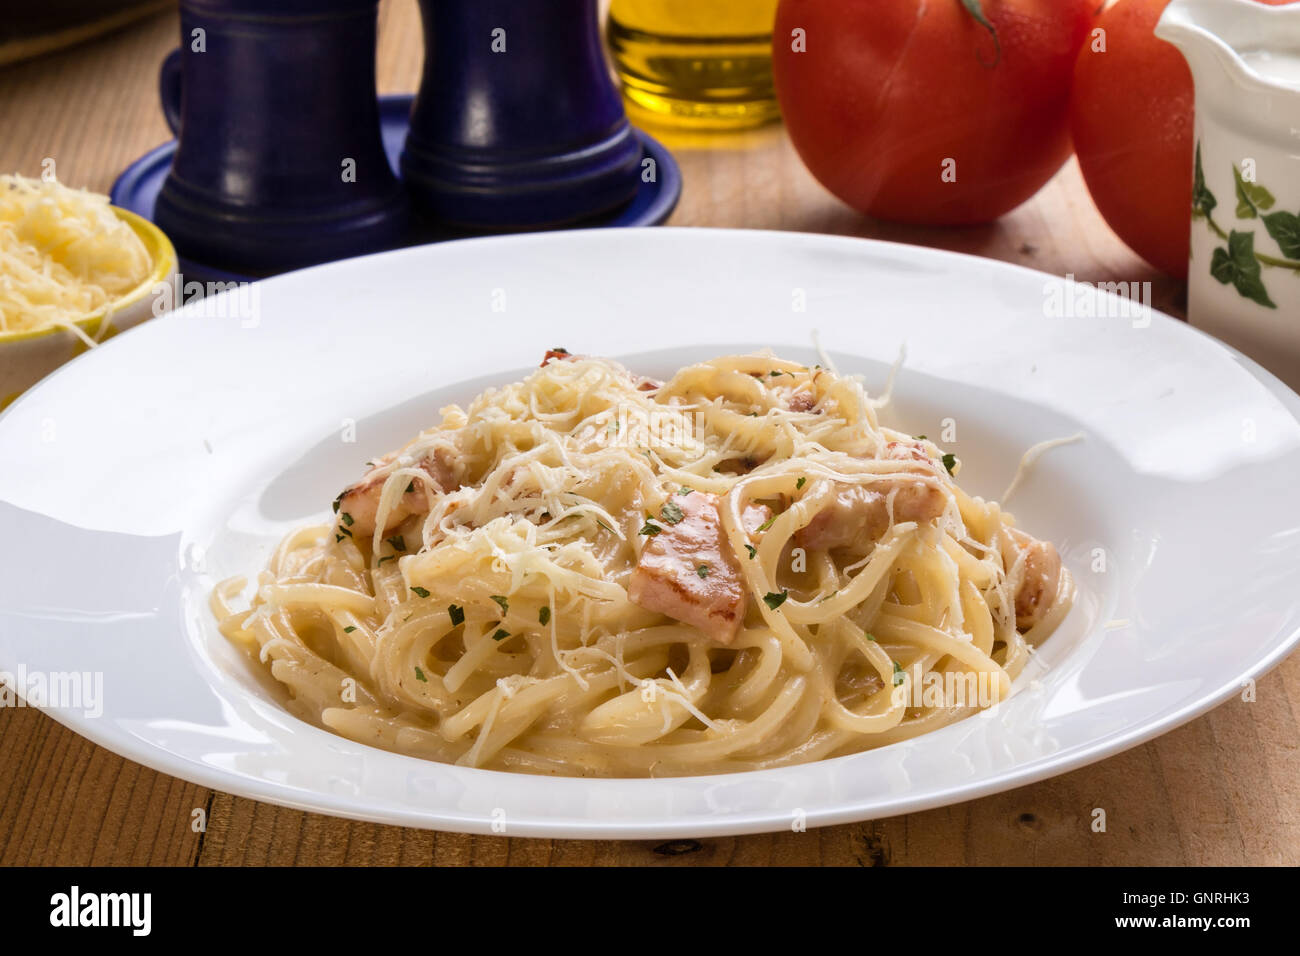 spaghetti carbonara on wooden table with rustic setting Stock Photo